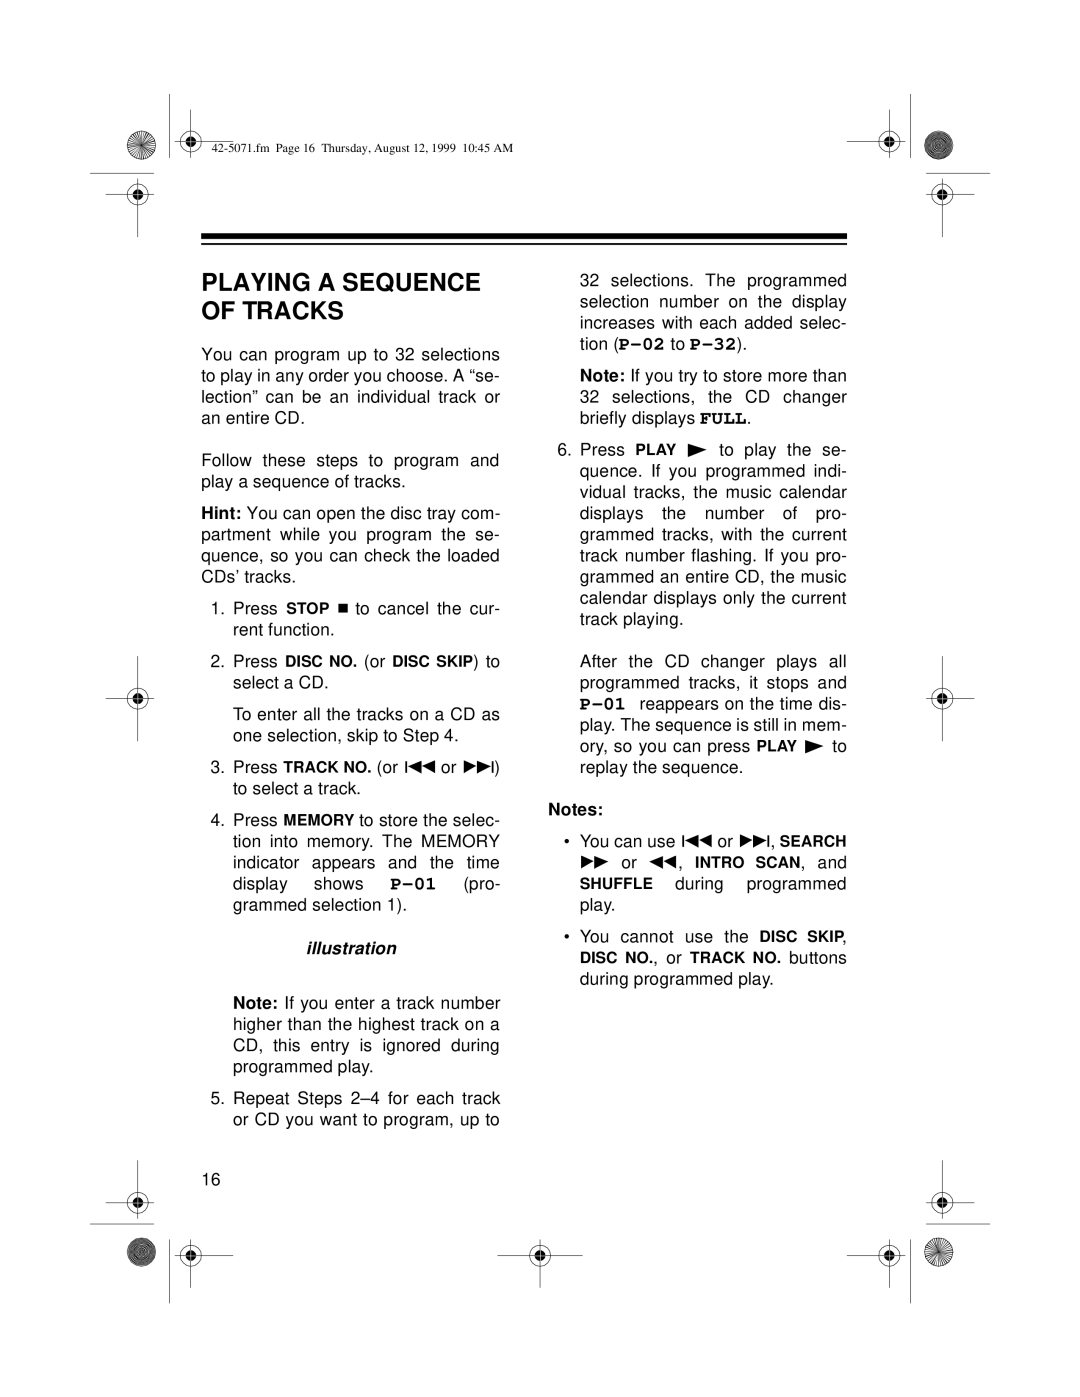 Radio Shack CD-8150 owner manual Playing A Sequence Of Tracks, illustration 